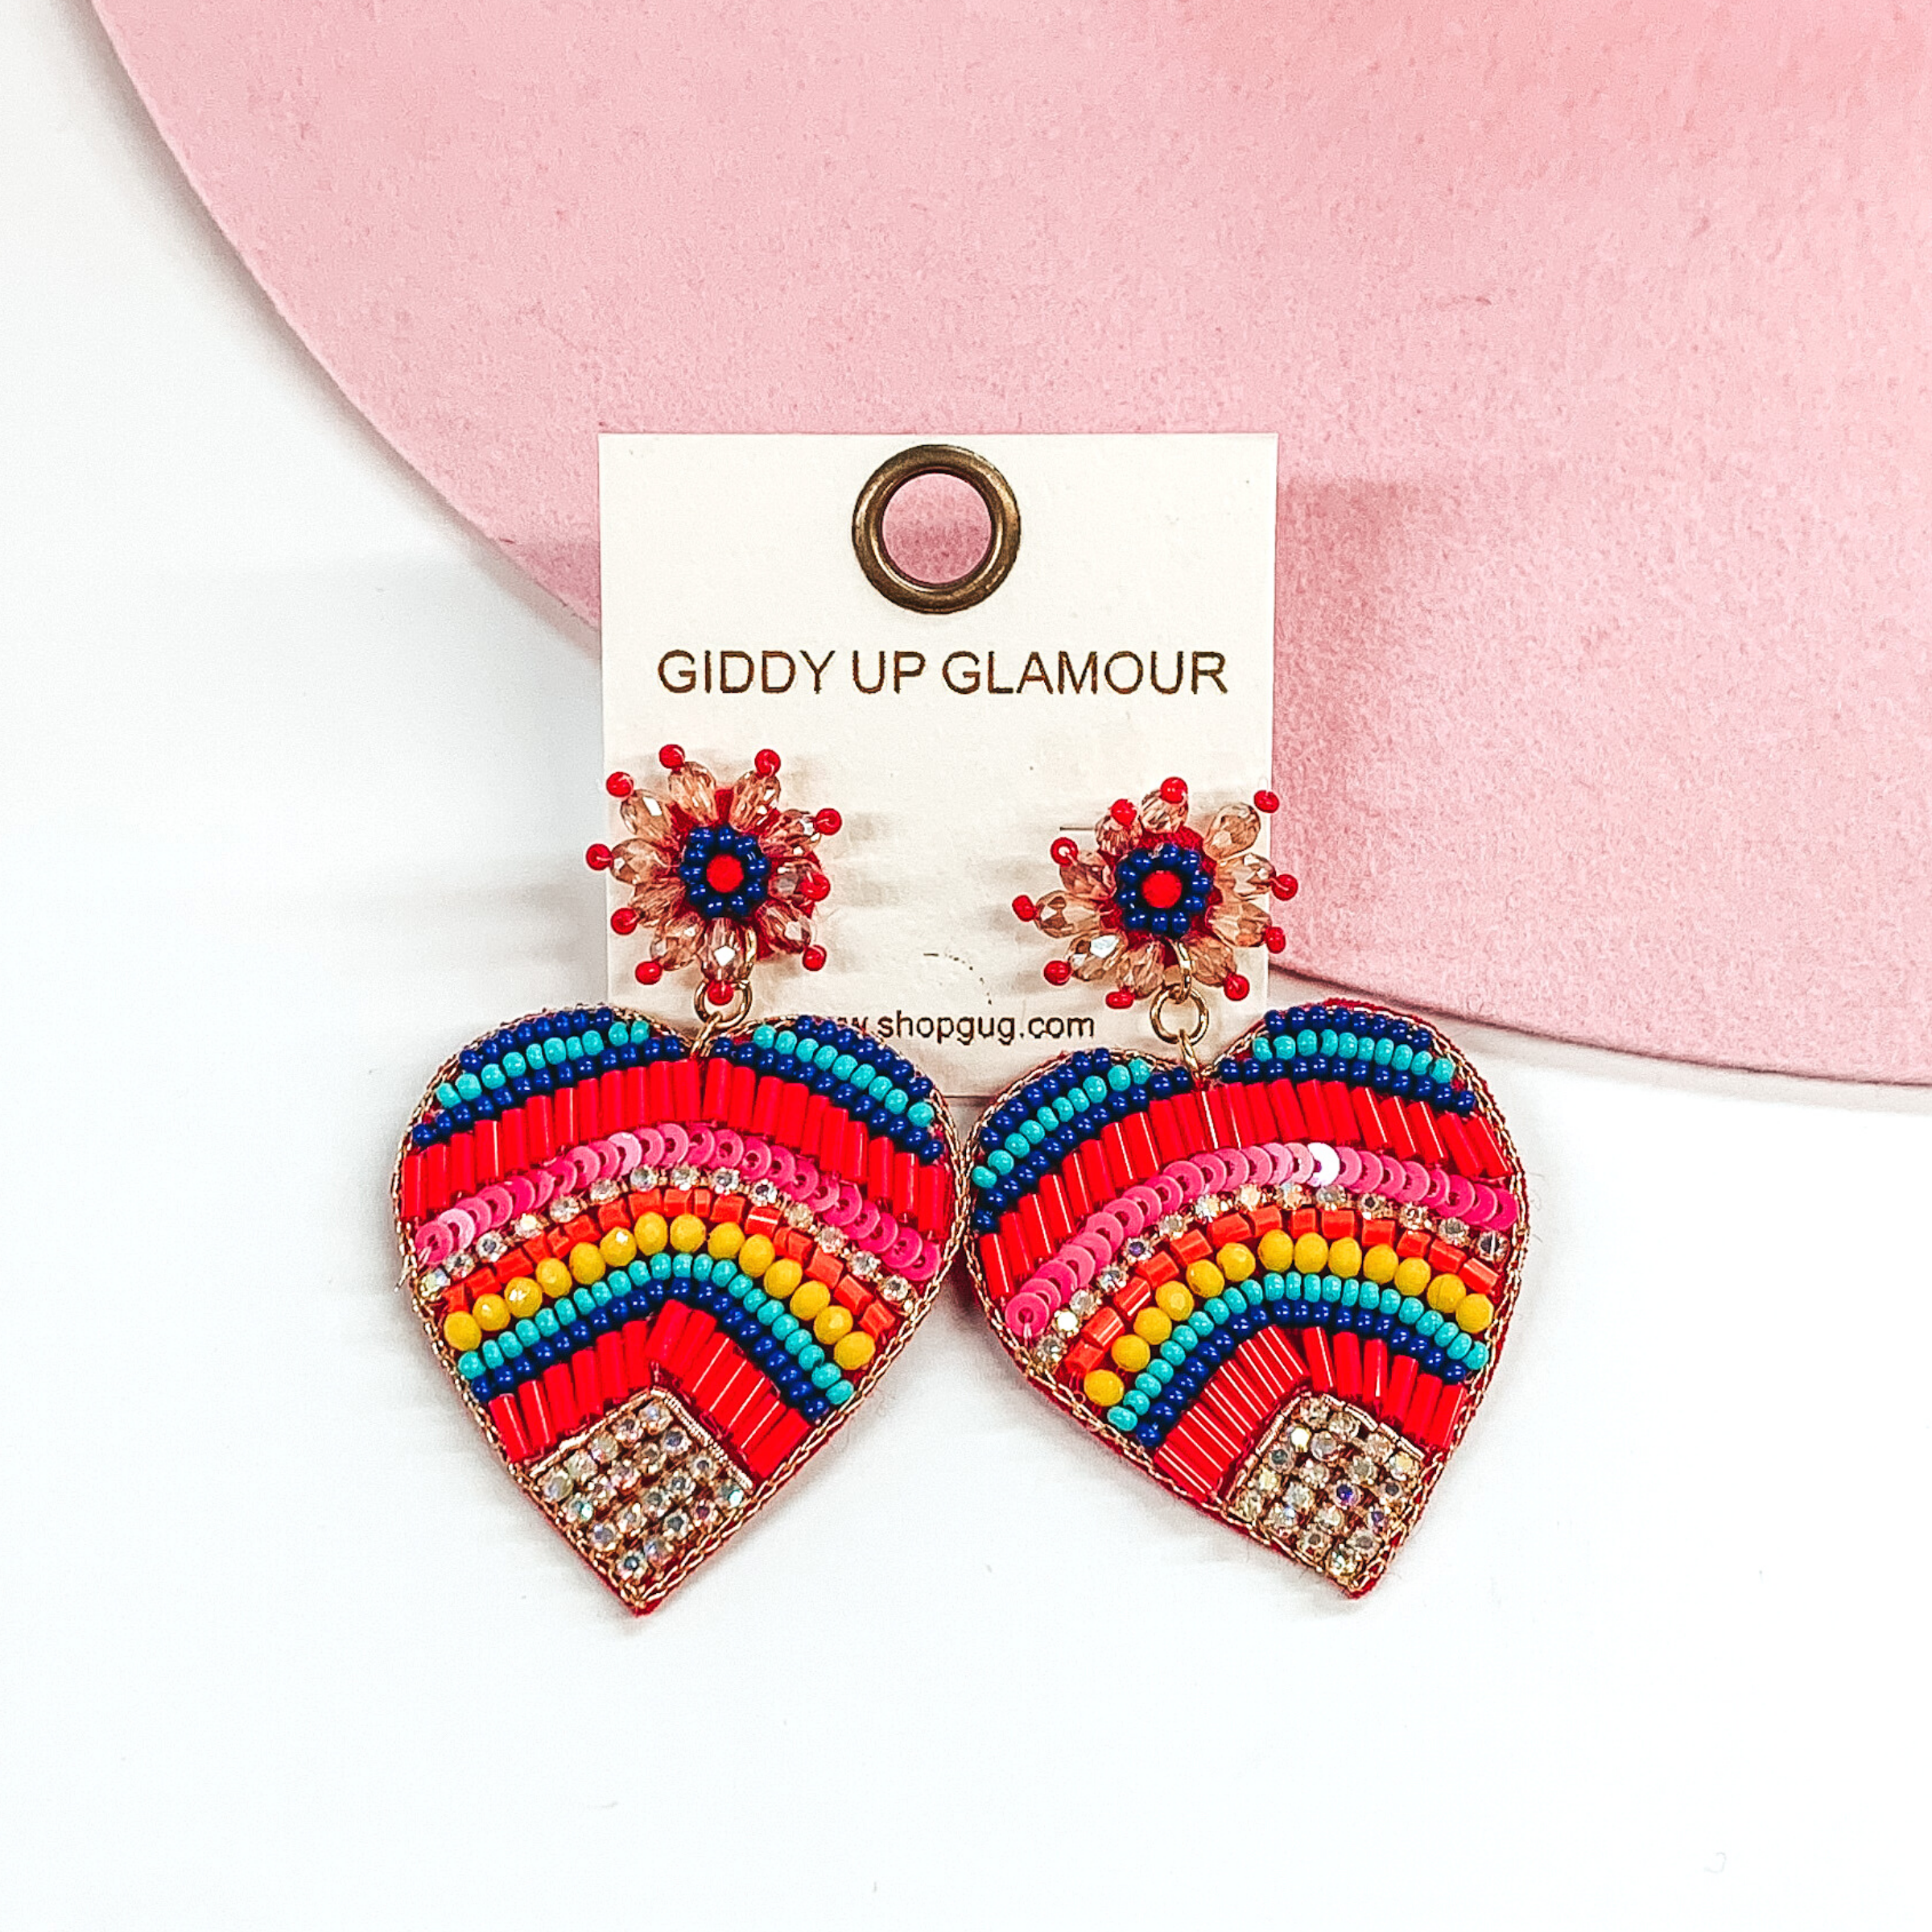 Beaded heart earrings that has multiple earrings. These earrings are pictured on a white and pink background. 